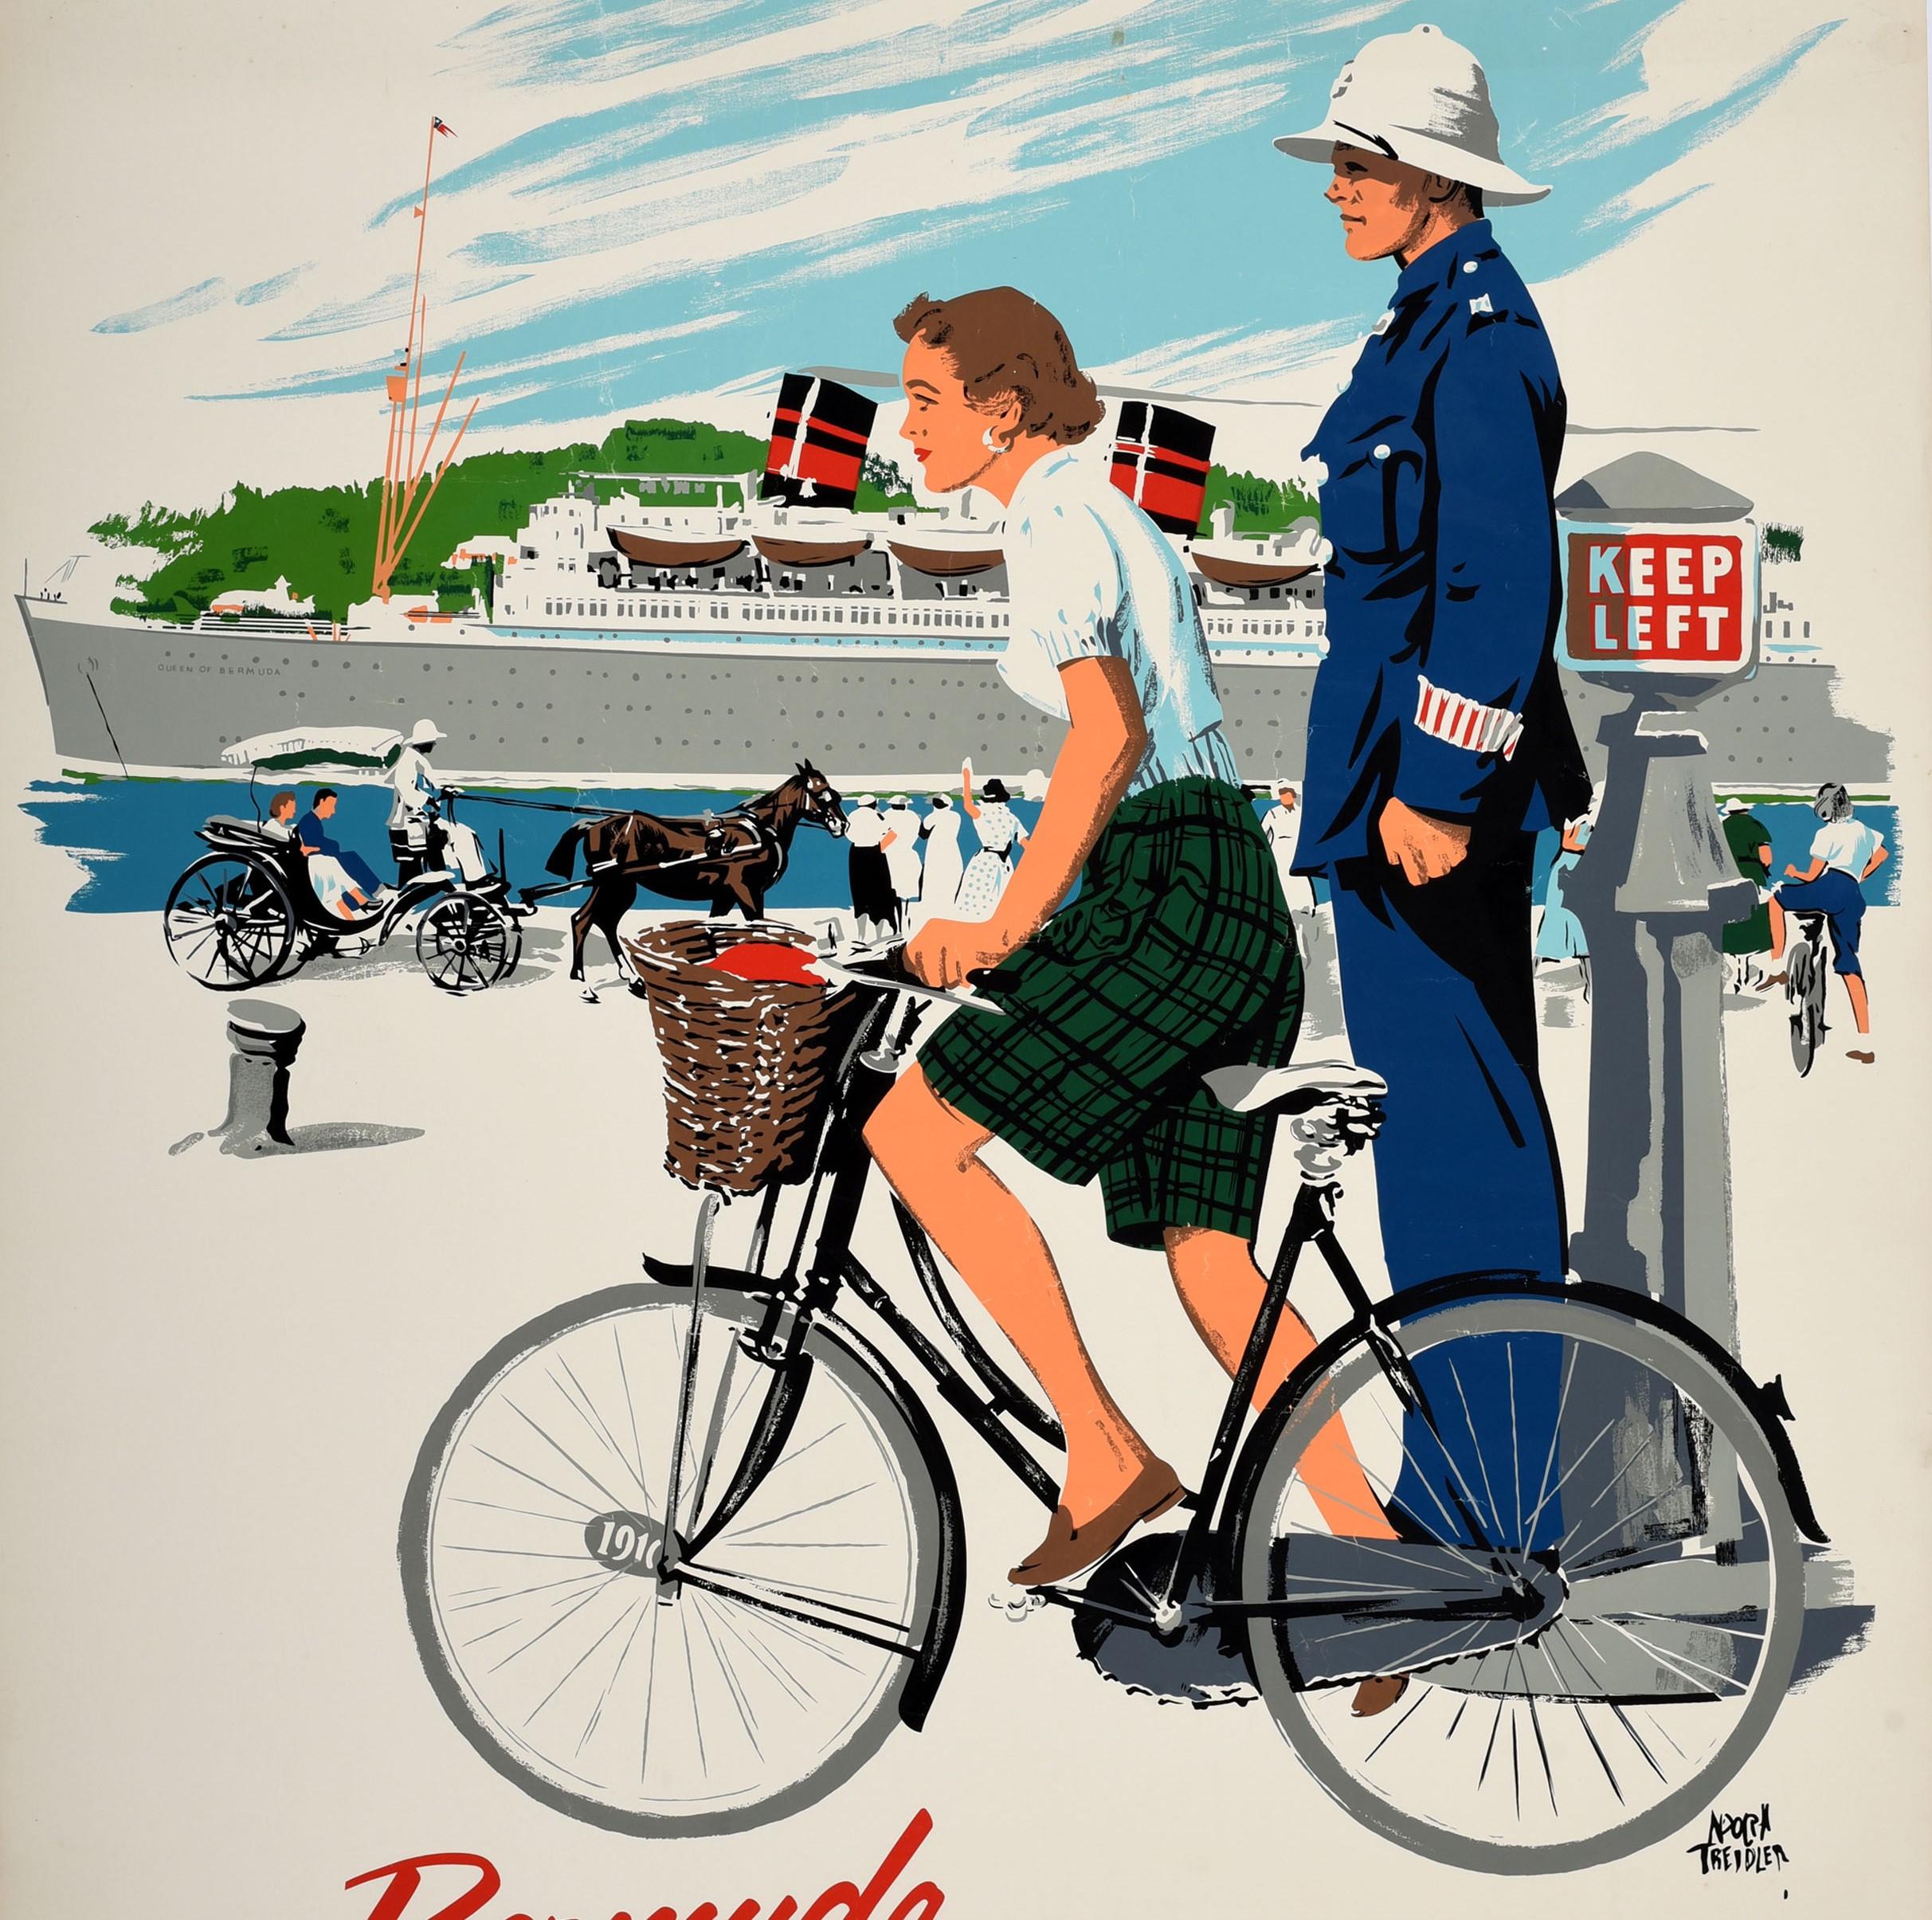 Original vintage travel poster for Bermuda - on the Queen of Bermuda. Scenic design by Adolph Treidler (1886-1981) featuring a lady wearing green chequered shorts riding a bicycle next to a policeman standing by a Keep Left notice, a couple enjoying